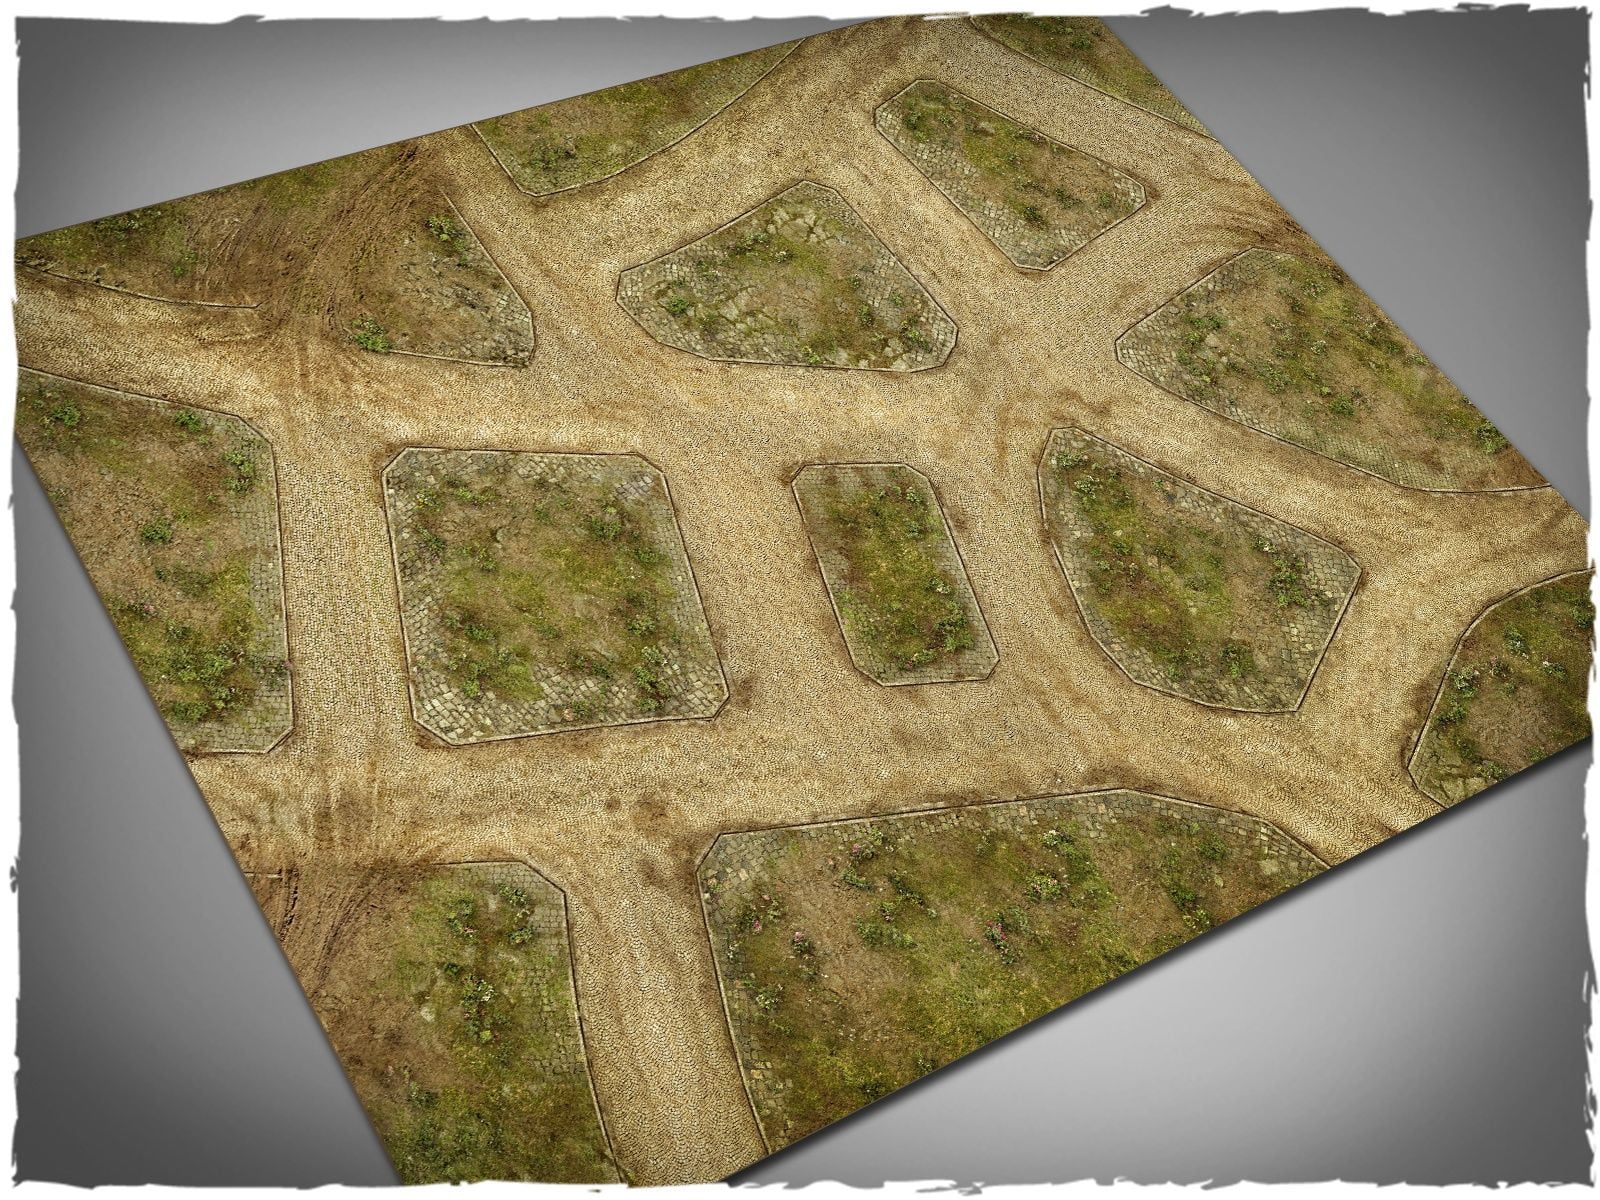 44in x 60in, Cobblestone Streets V2 Themed Mousepad Games Mat